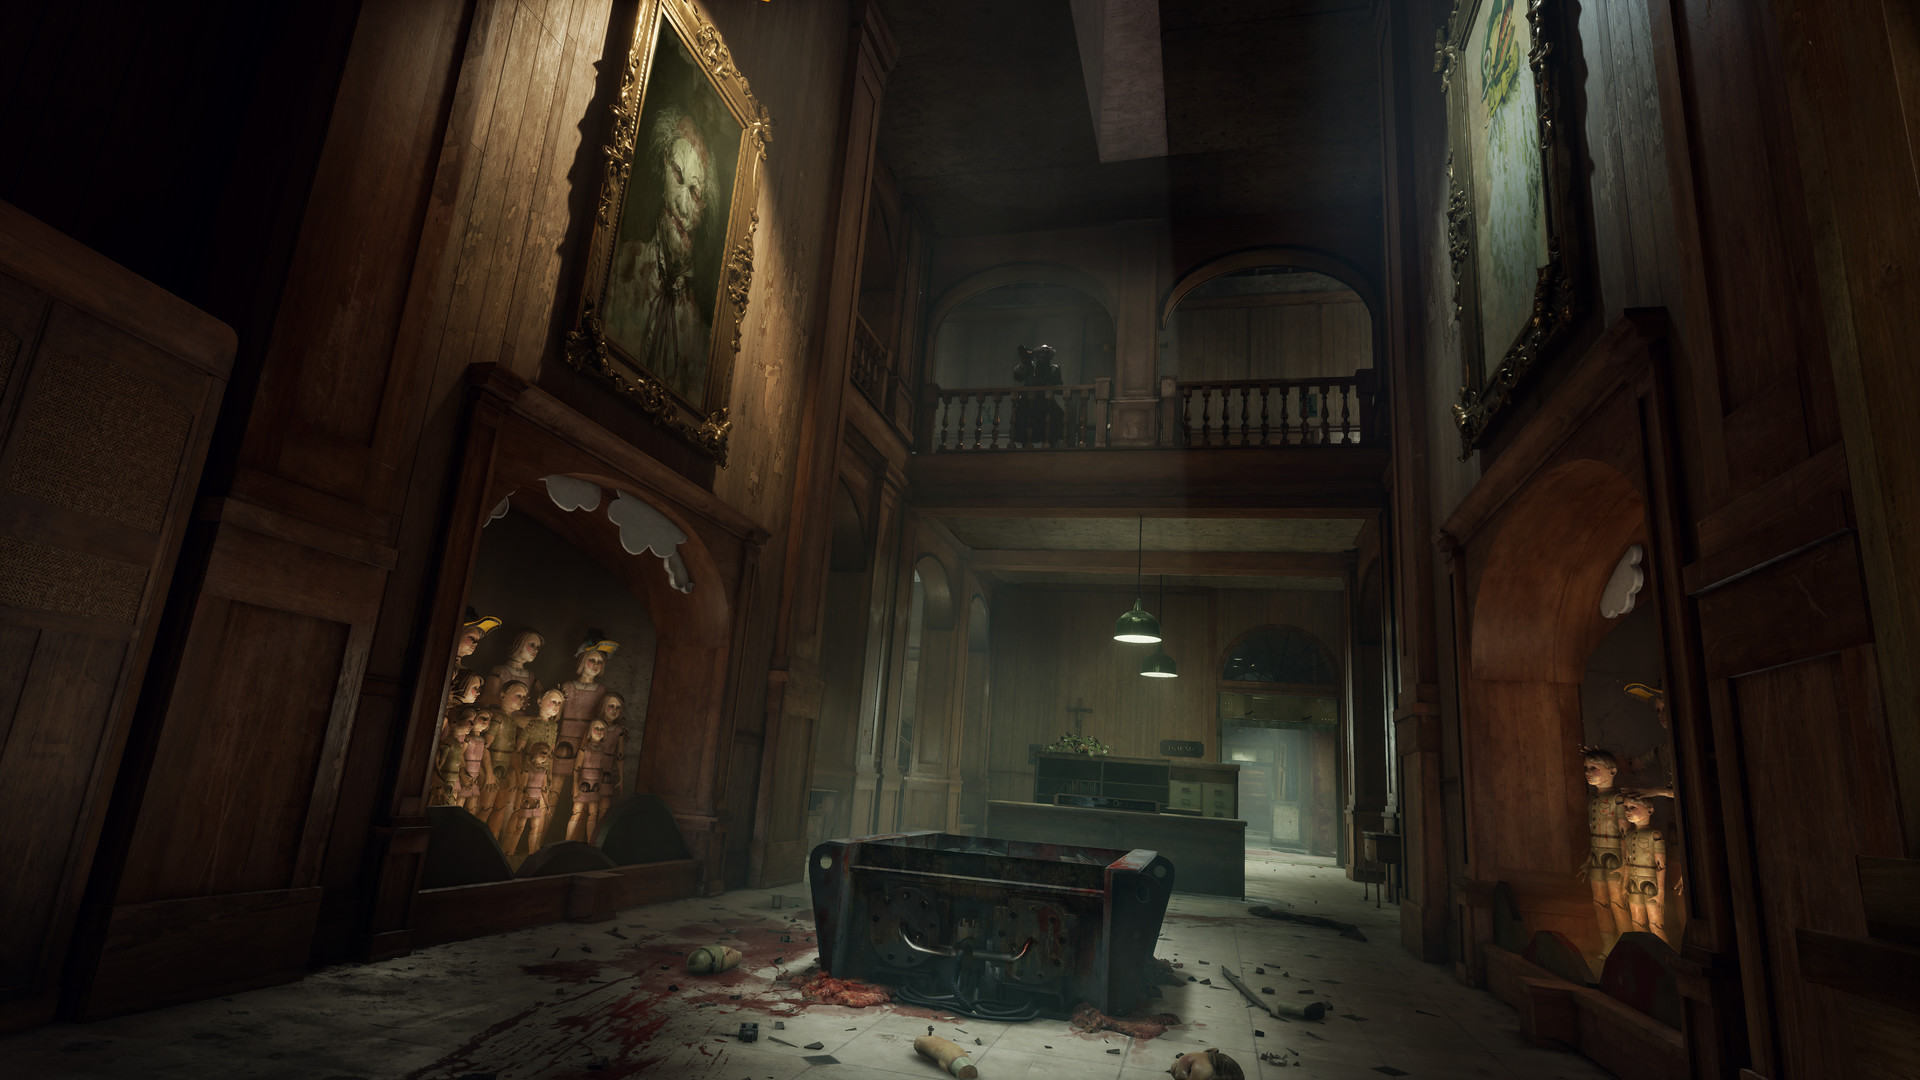 The Outlast Trials Gameplay Trailer Showcased at Gamescom Opening Night Live